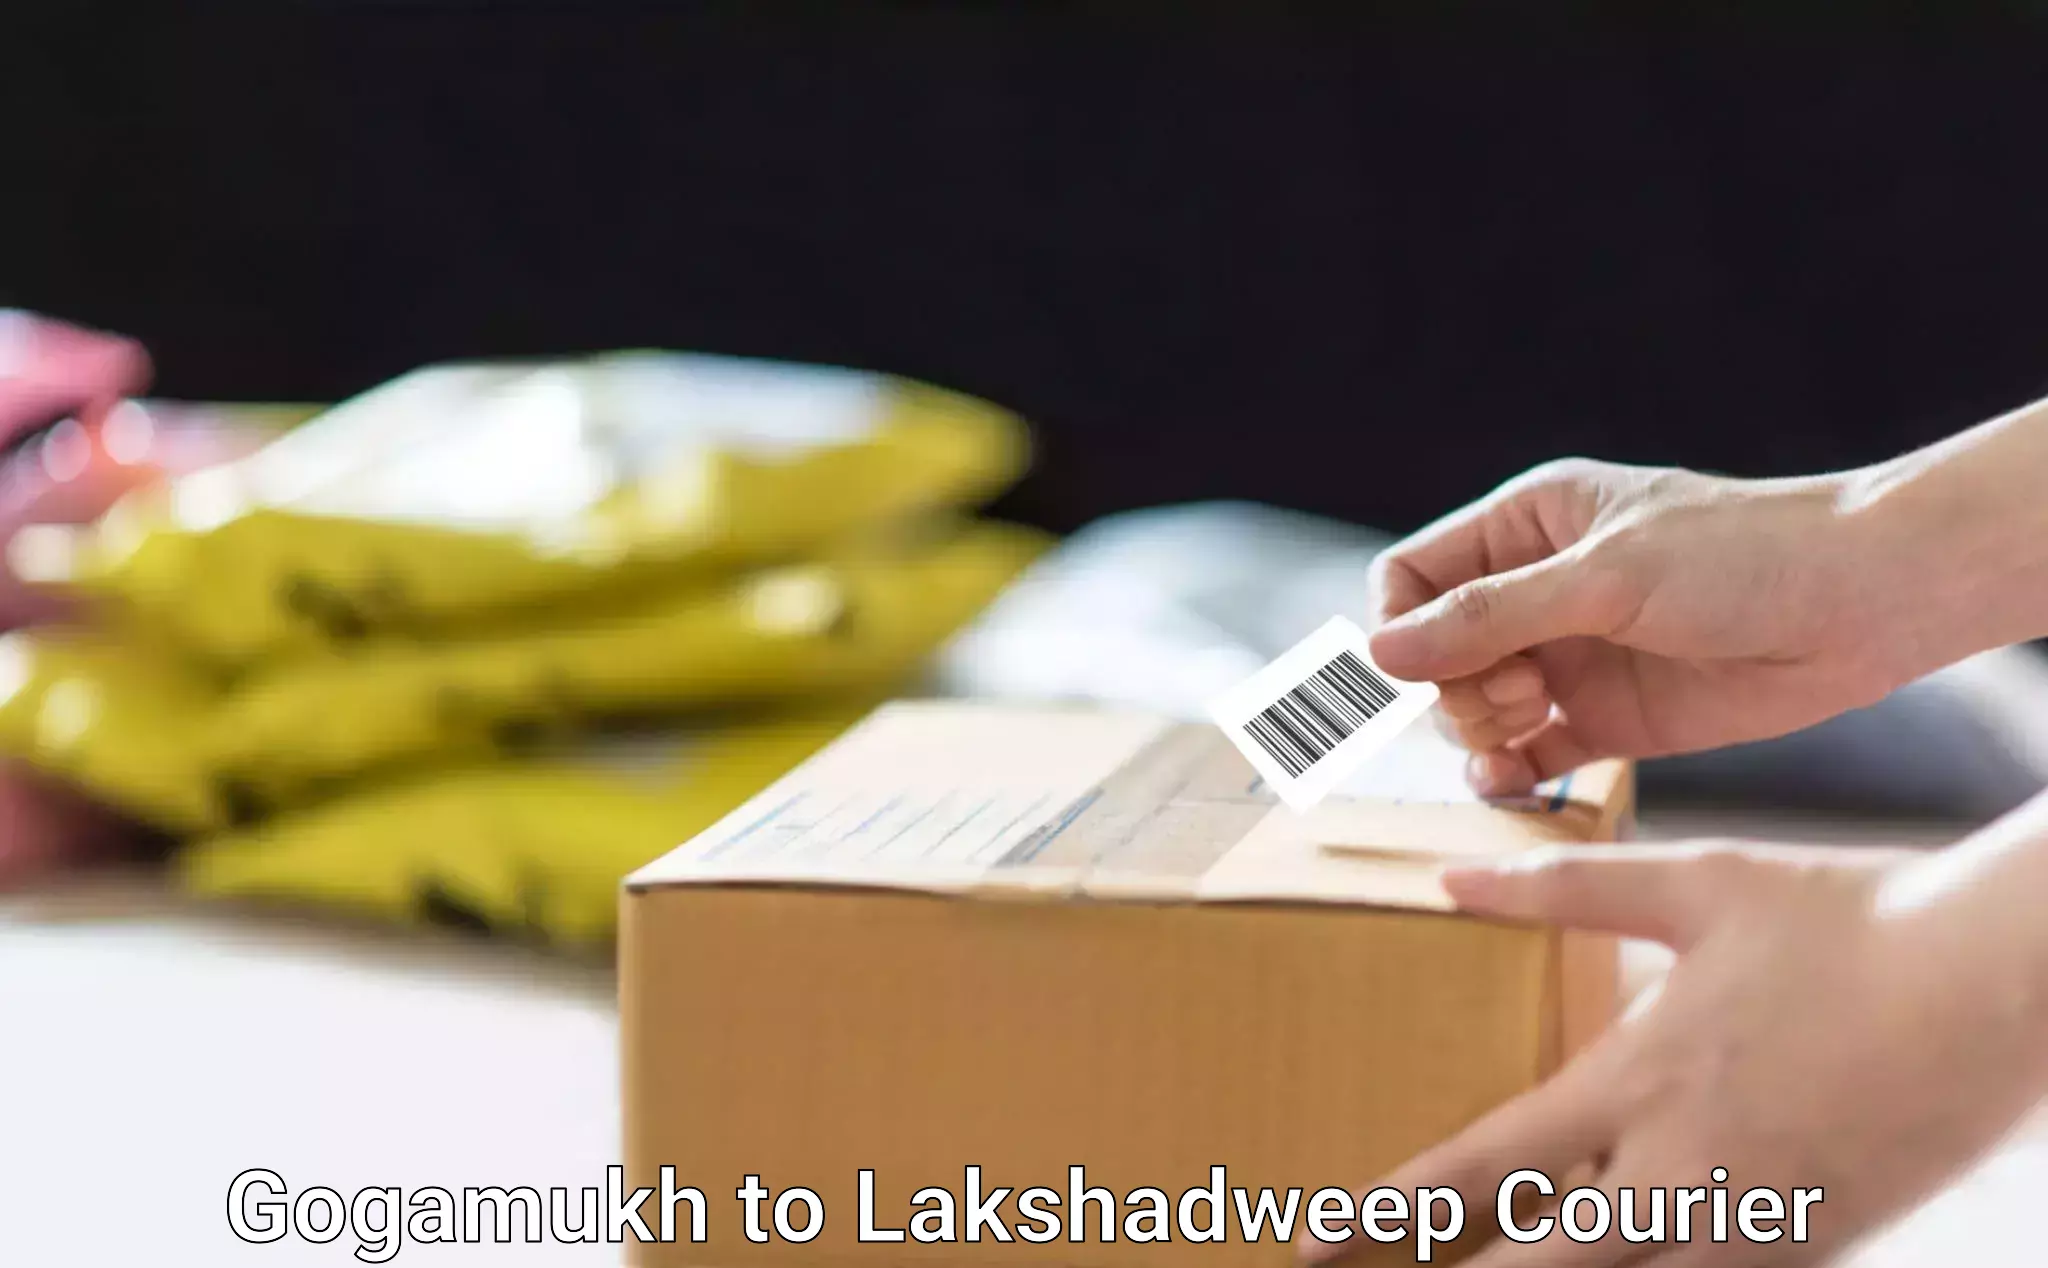 Comprehensive shipping services Gogamukh to Lakshadweep